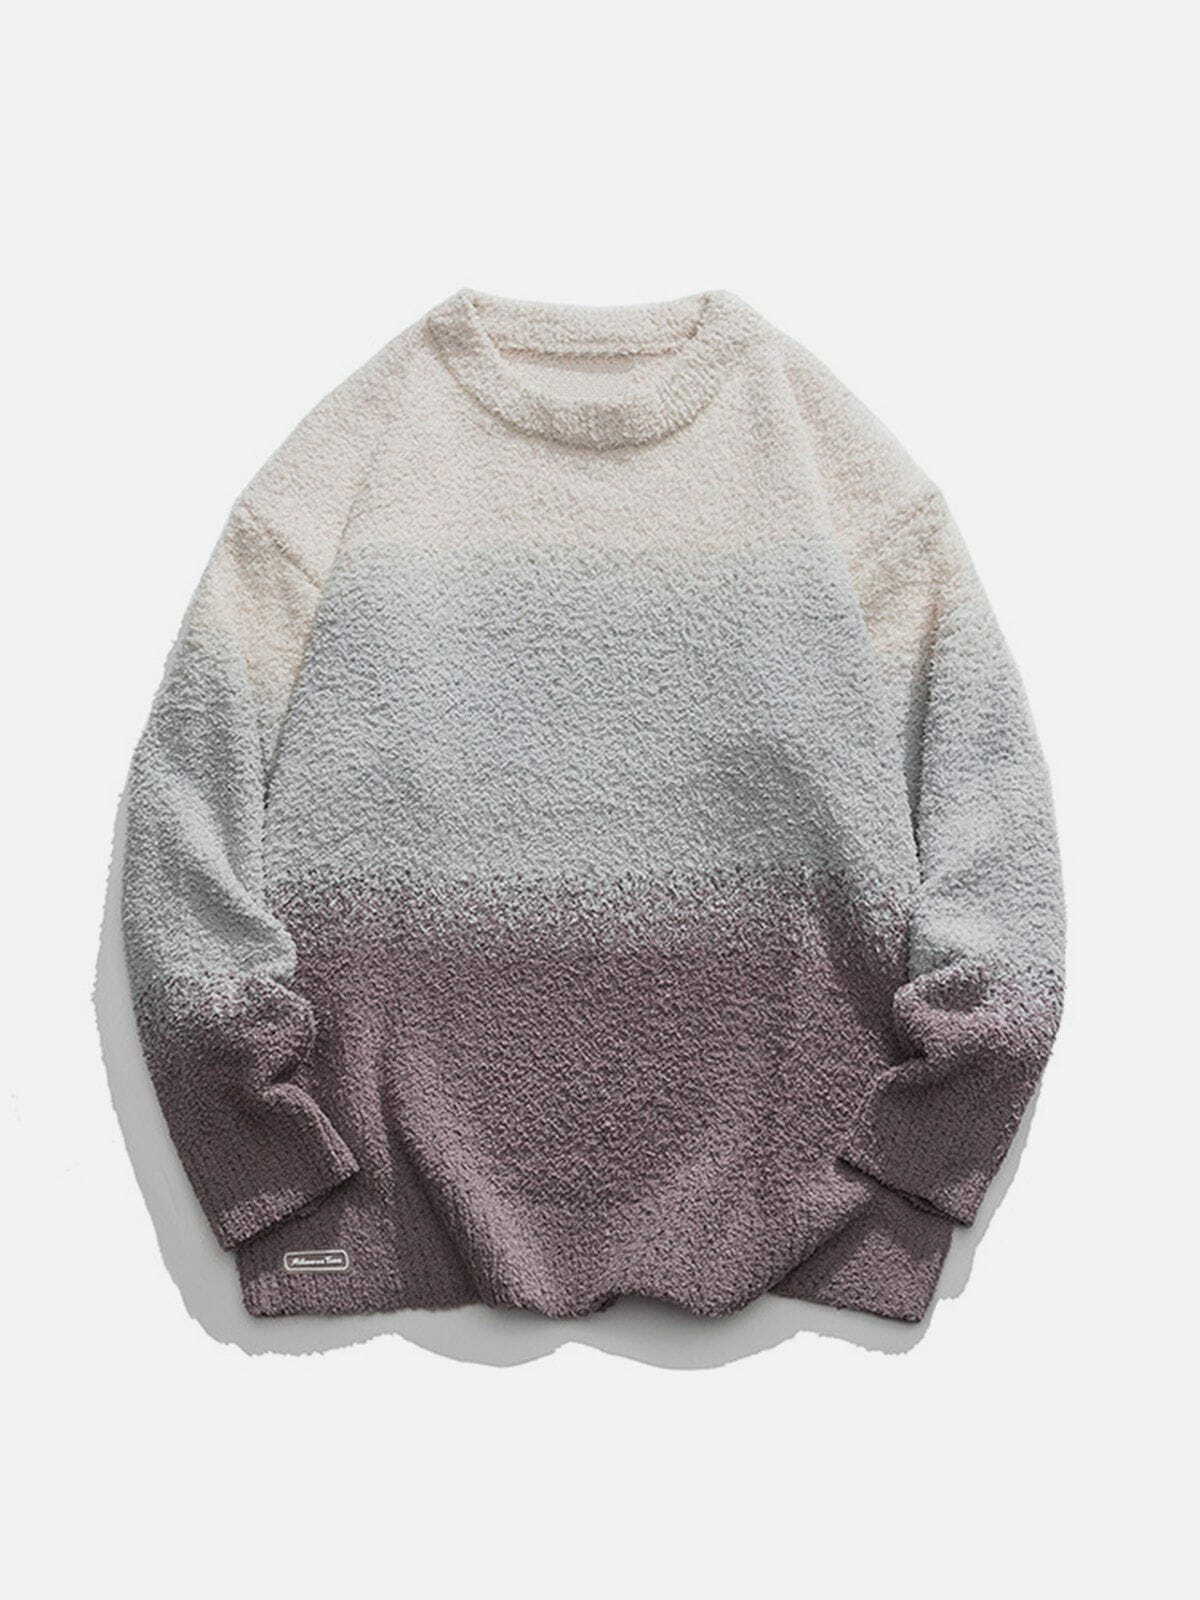 gradient three colour sweater edgy streetwear chic 6628